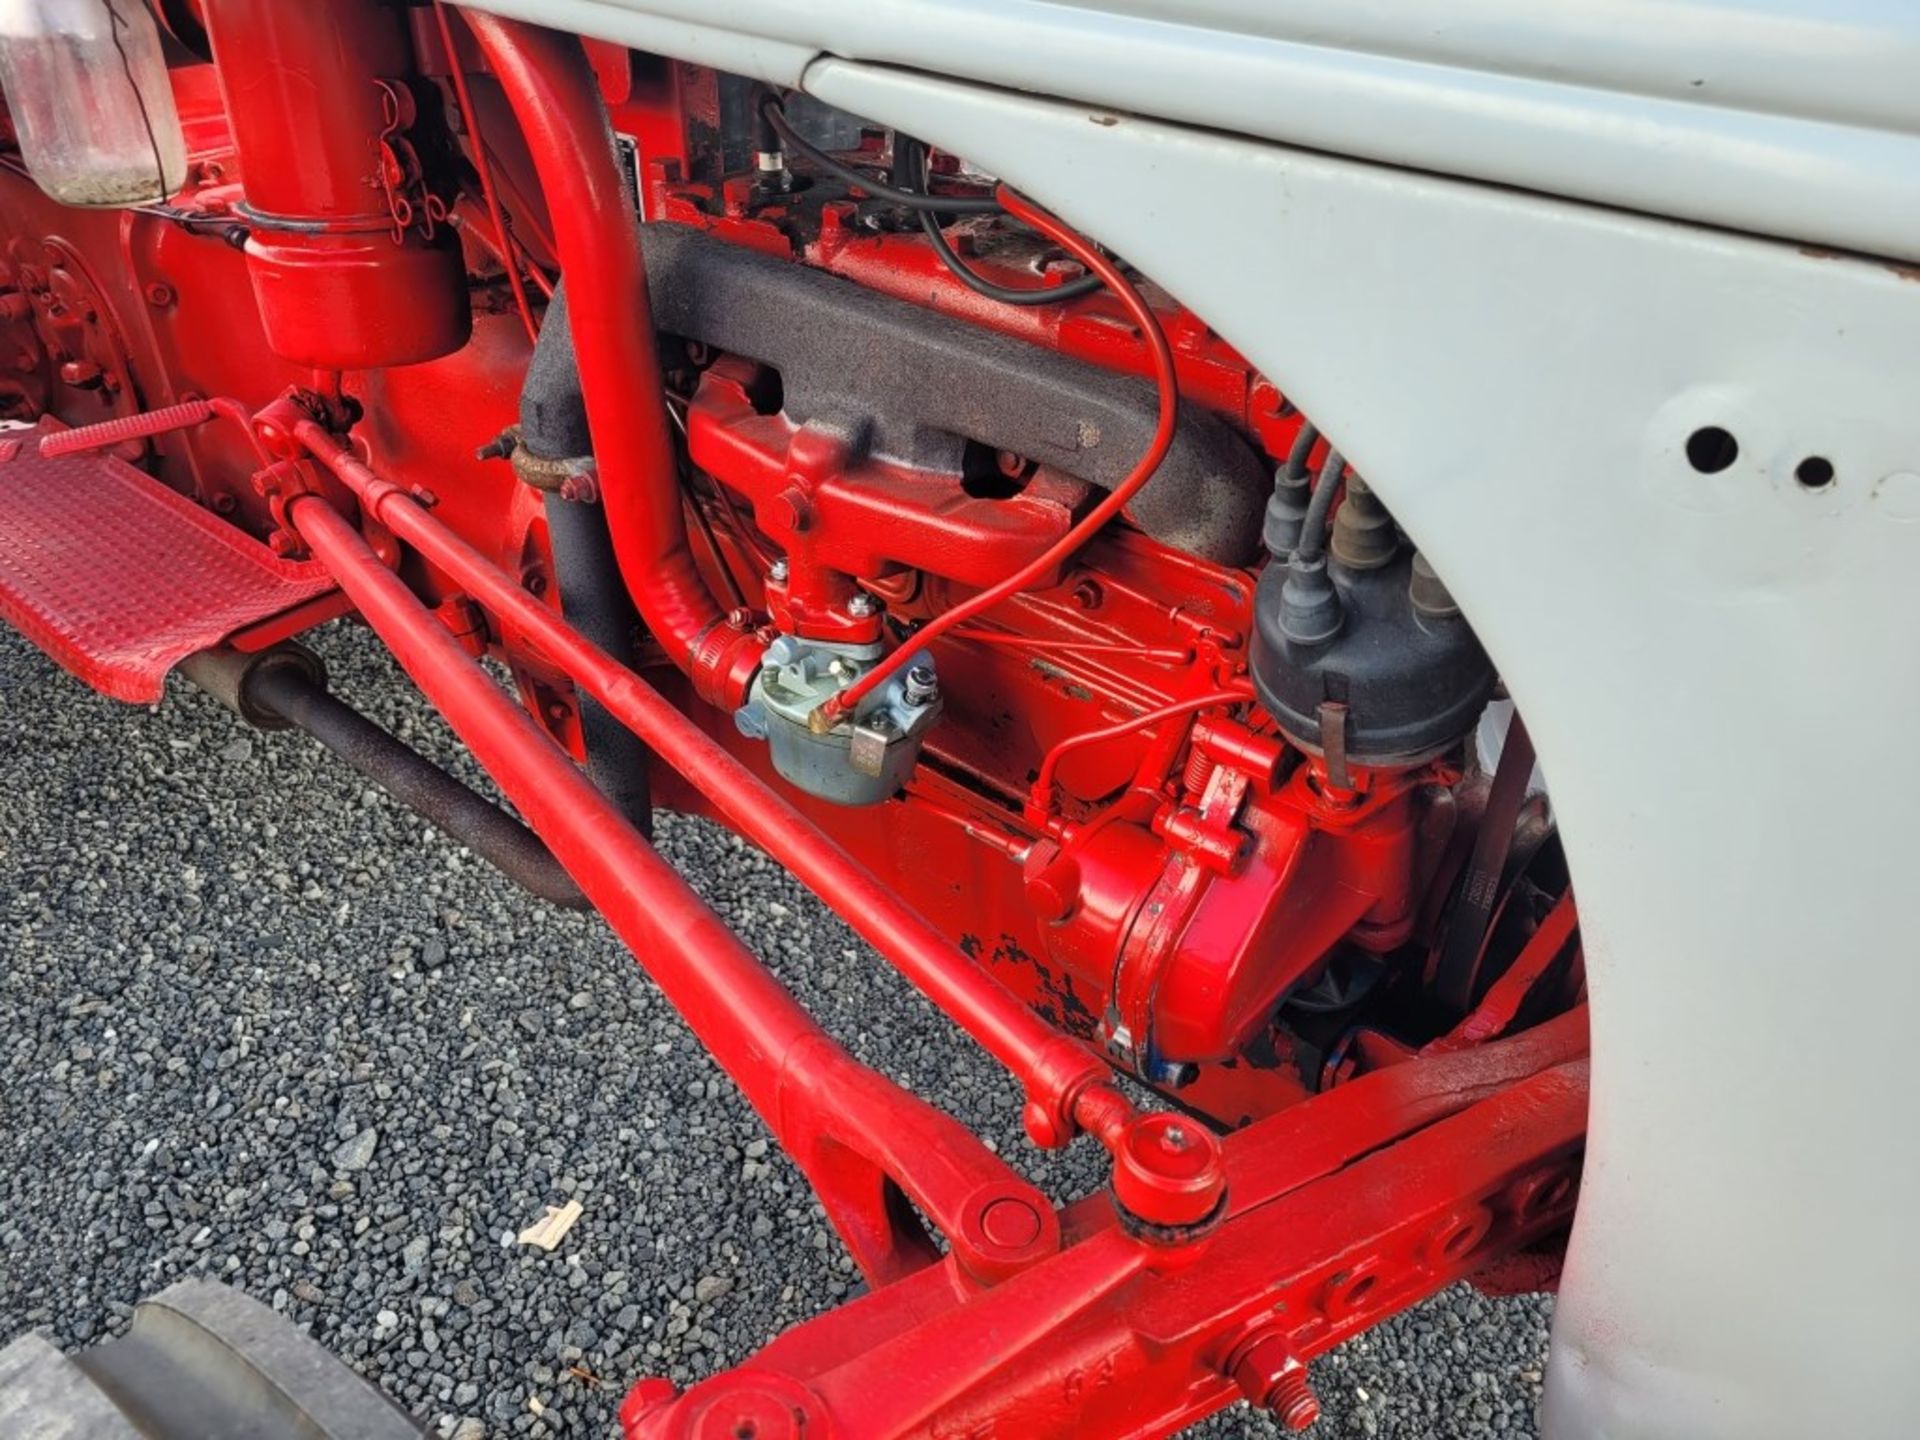 1951 Ford 8N-B Utility Tractor - Image 19 of 38